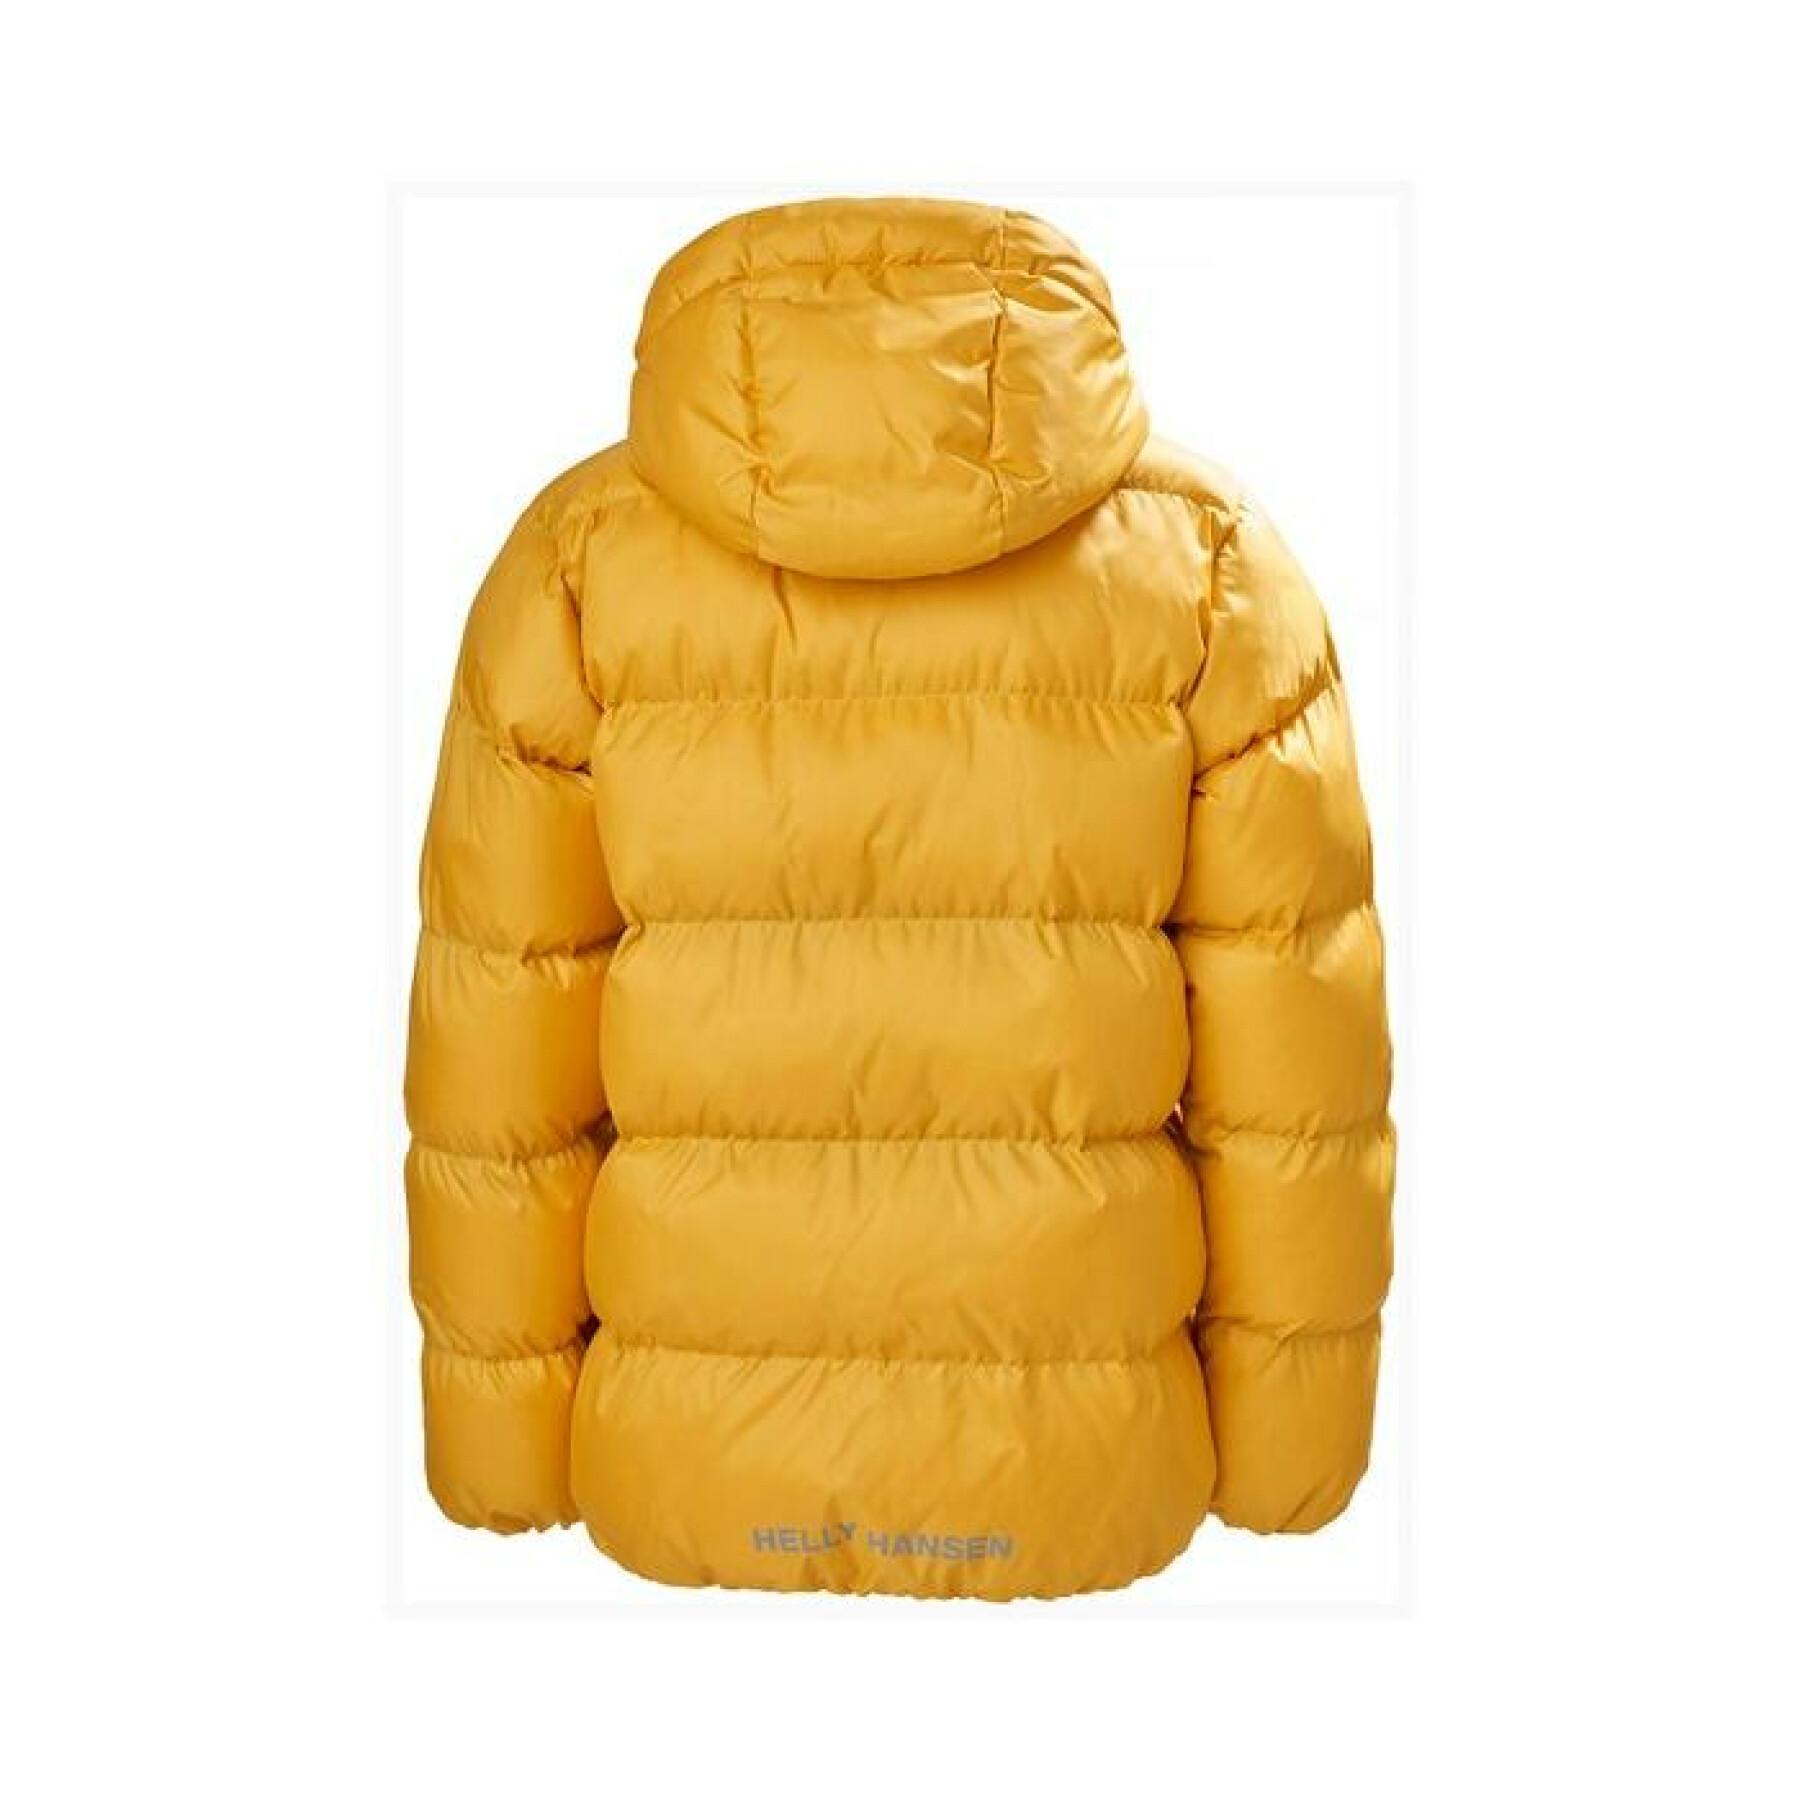 Radical puffy jacket for kids Helly Hansen